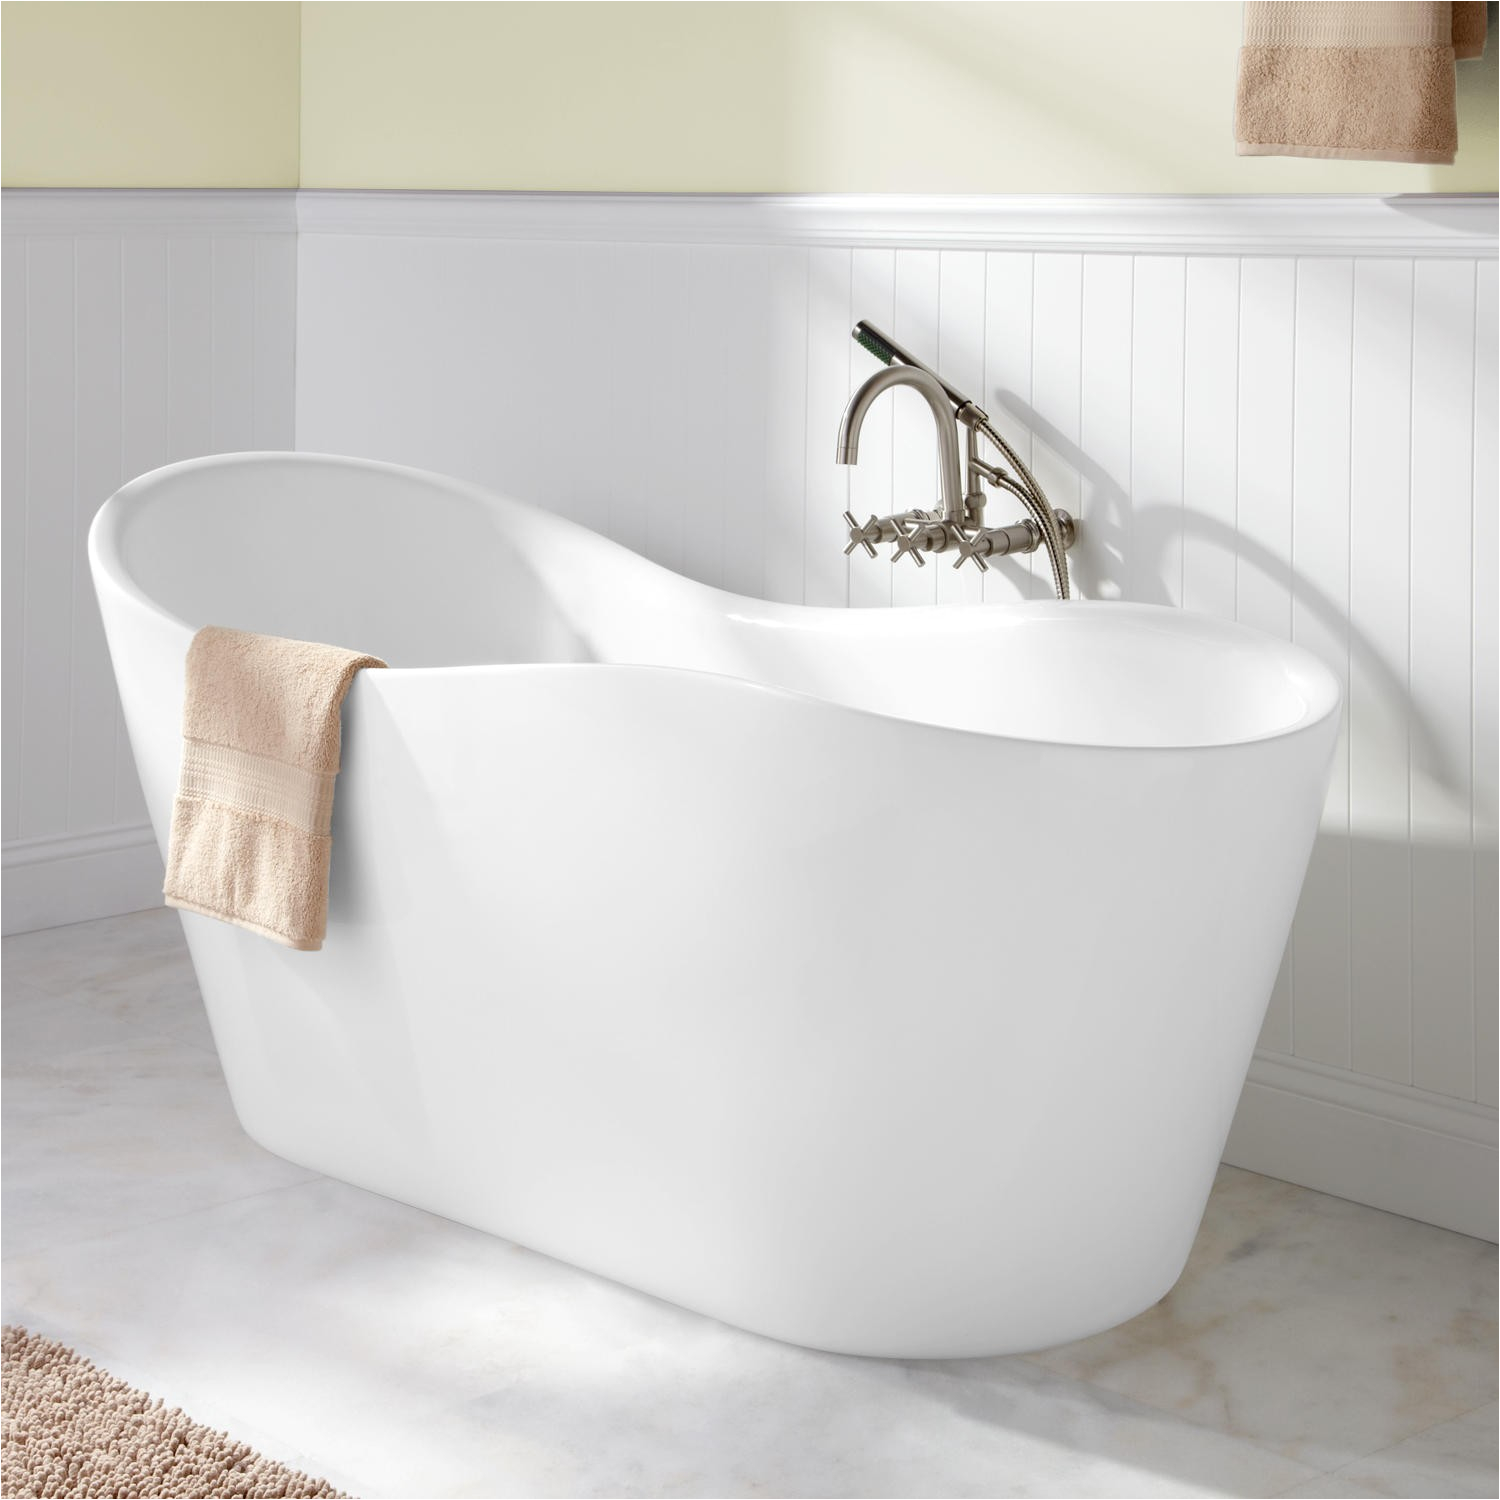 Soaking Bathtubs at Lowes Bathroom Amazing Classic Lowes Bath Tubs for Your